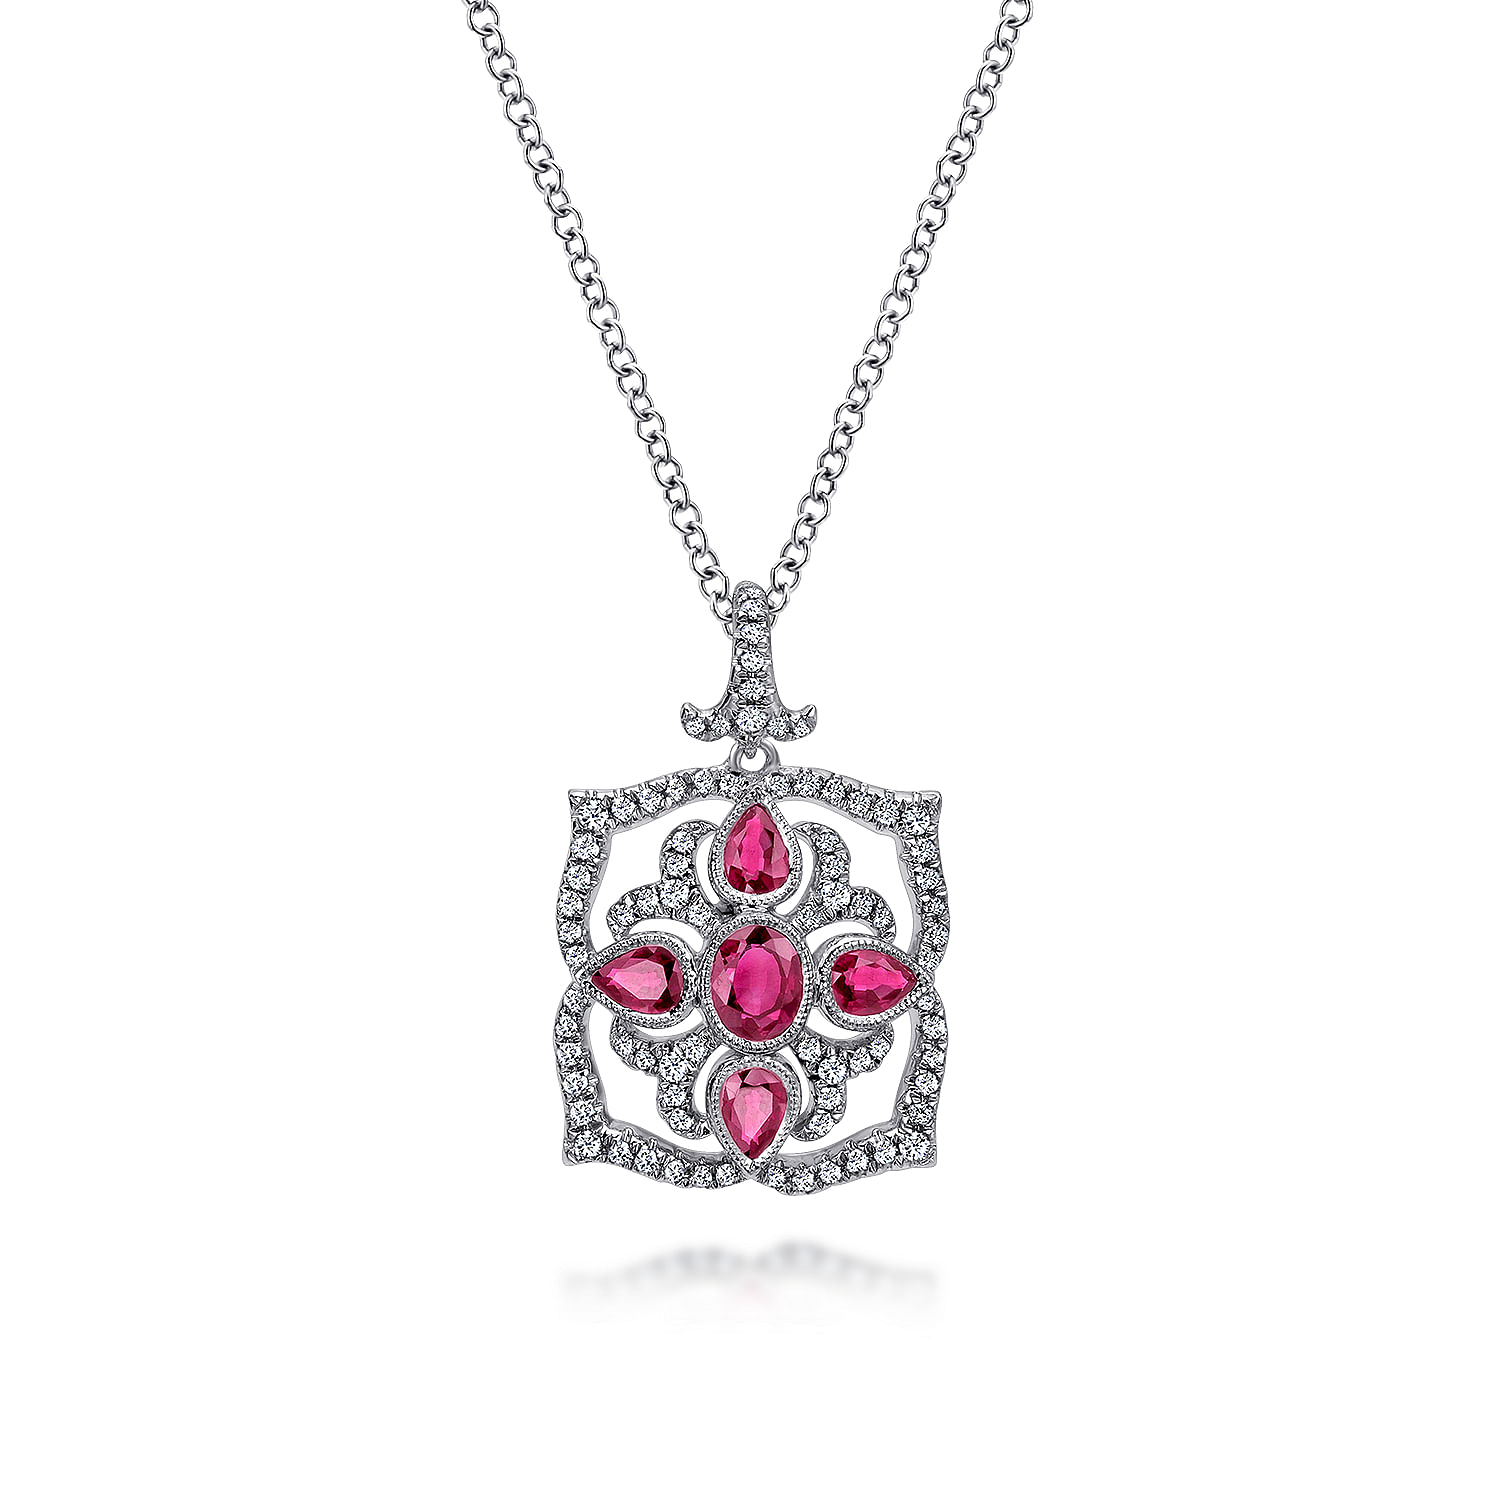 Vintage Inspired 14K White Gold Ruby and Diamond Pendant Necklace